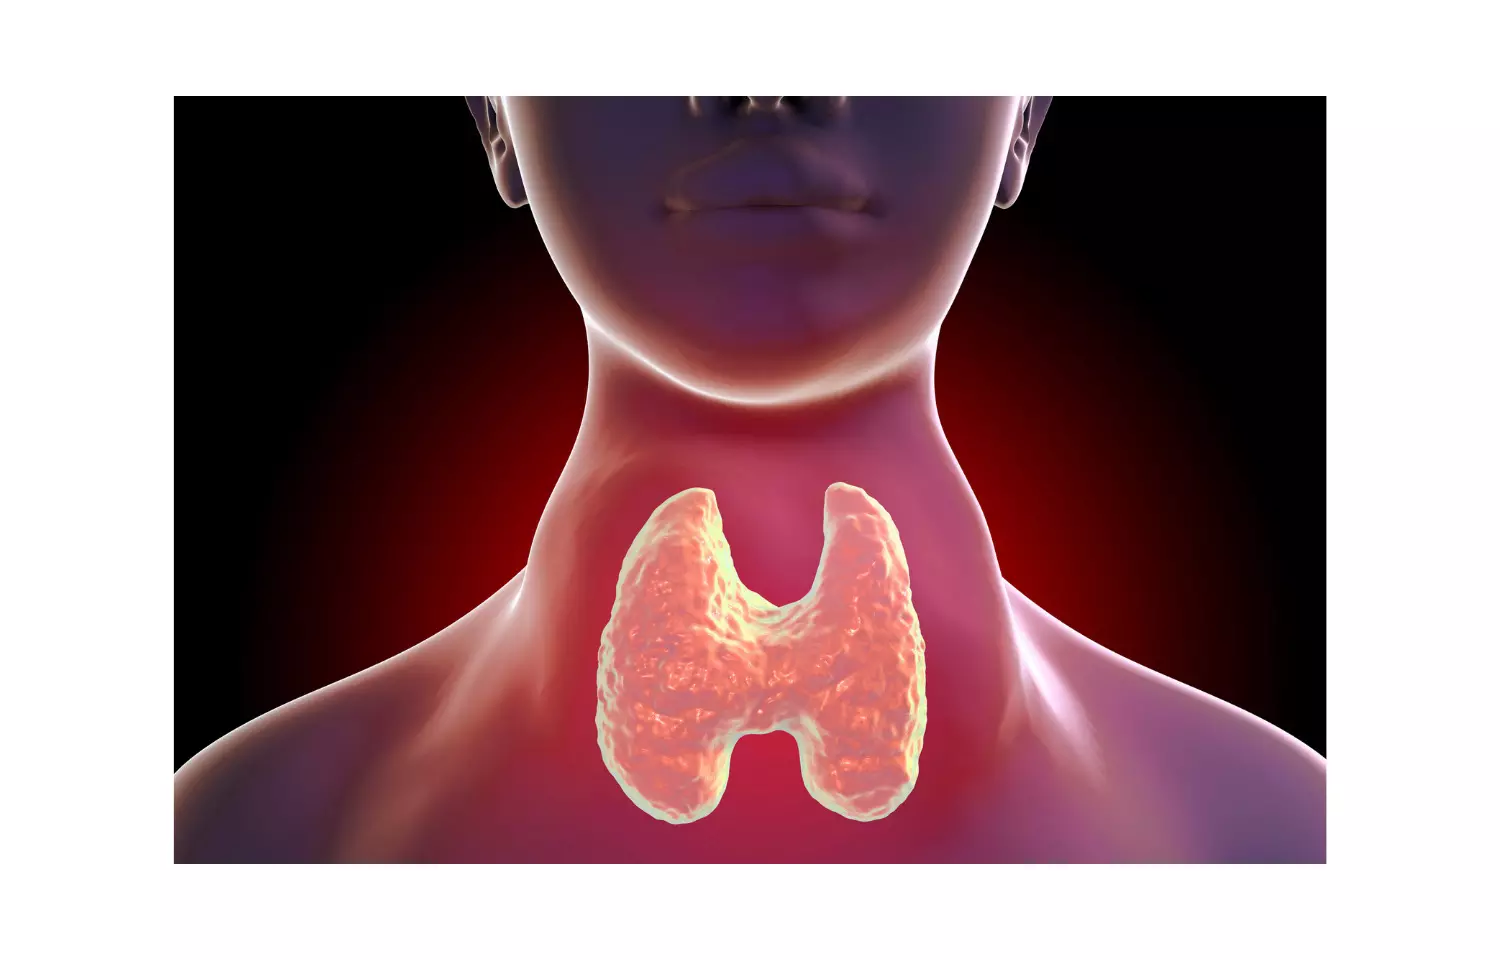 Maternal hyperthyroidism associated with cardiovascular diseases in offsprings, finds study